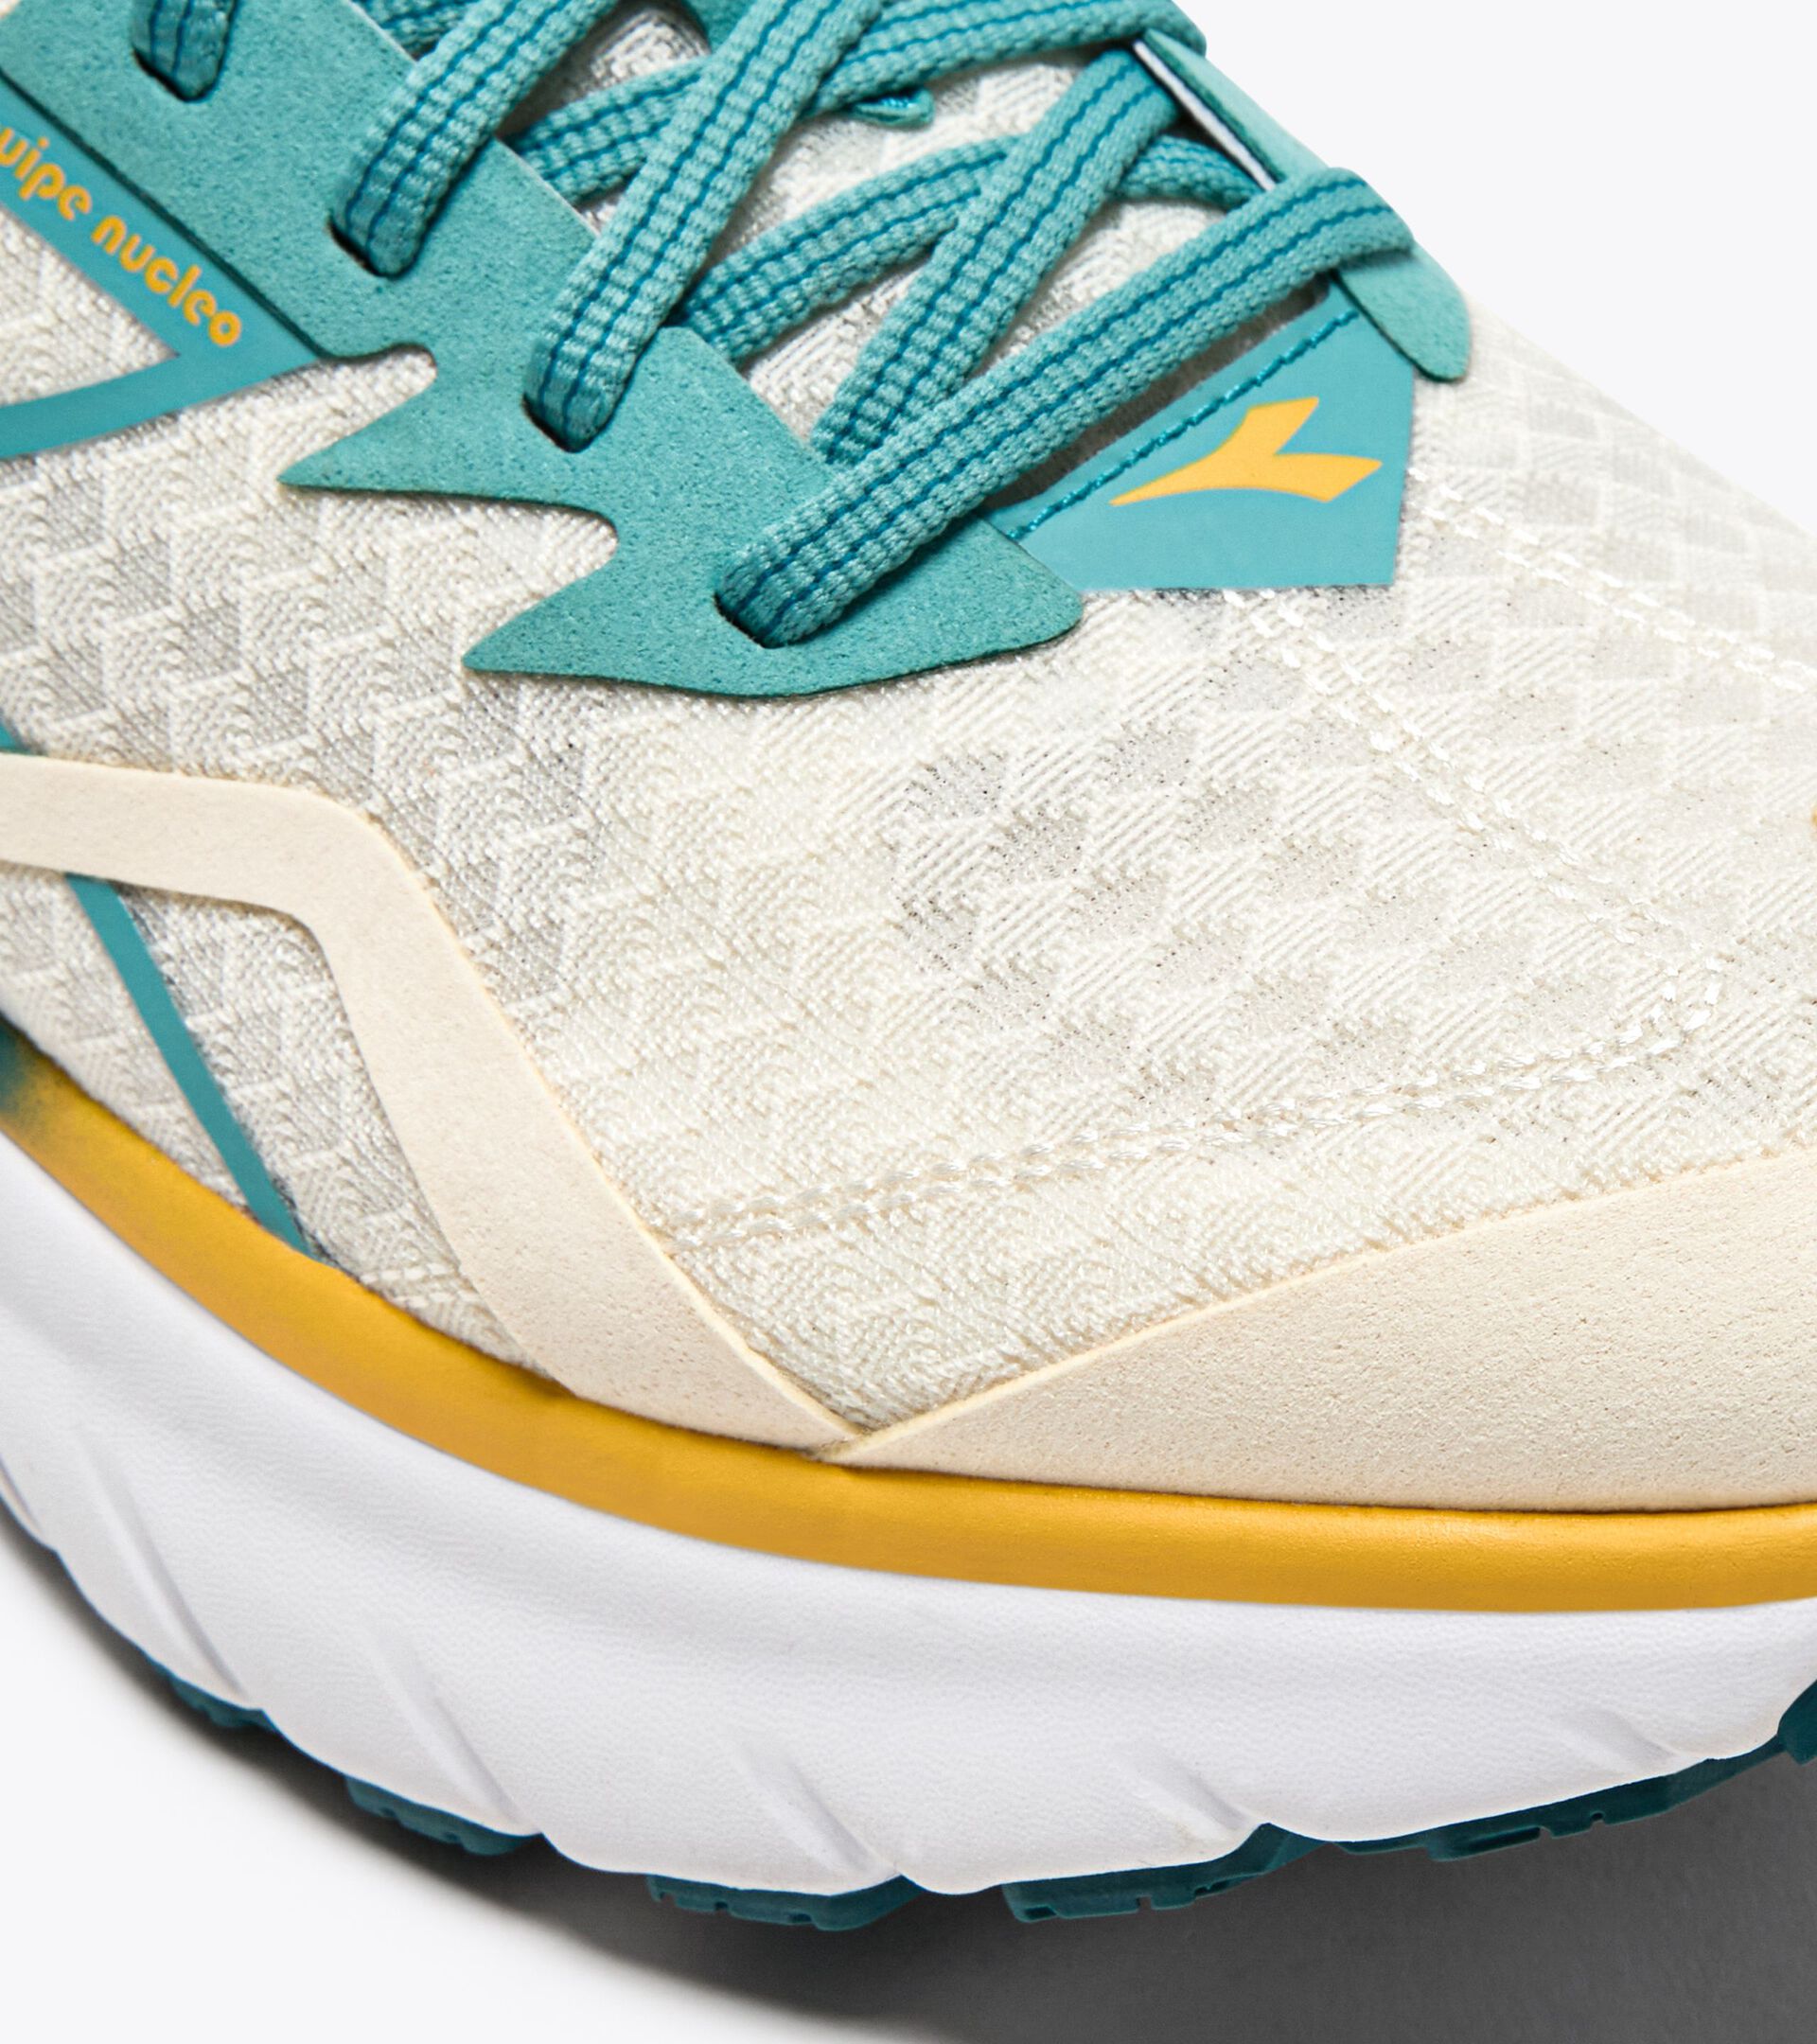 Wide fit running shoe - Cushioning and reactivity - Women’s
 EQUIPE NUCLEO WIDE W WHISPER WHITE/DUSTY TURQUOISE - Diadora